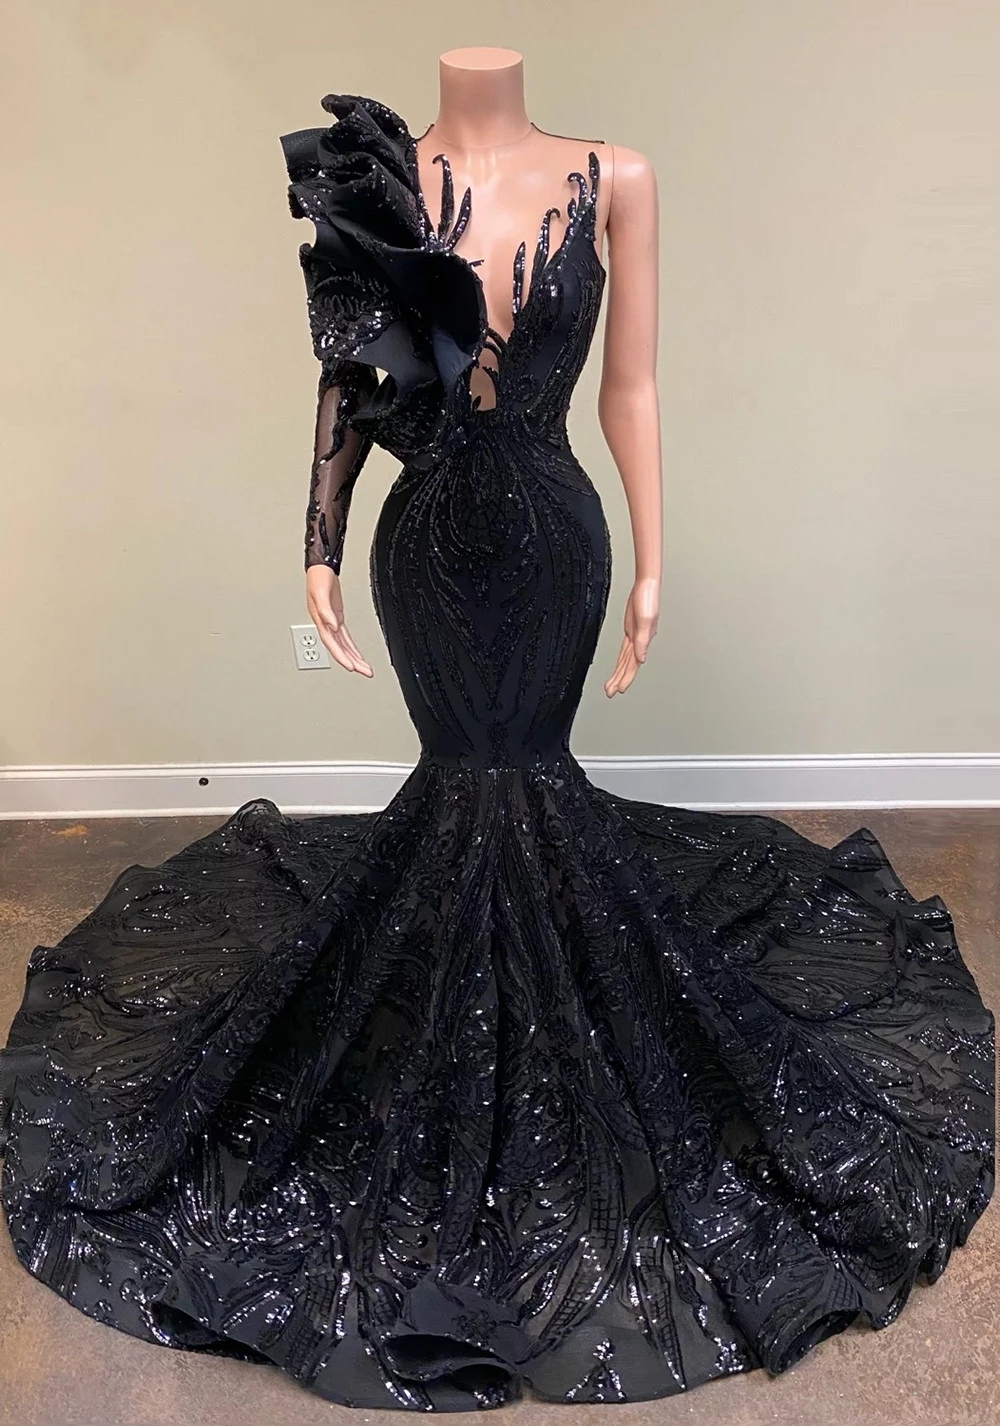 

Sexy Elegant Evening Dresses 2021 Mermaid Style Single Long Sleeve Black Sequin applique African Girl Gala Prom Party gown, Champagne